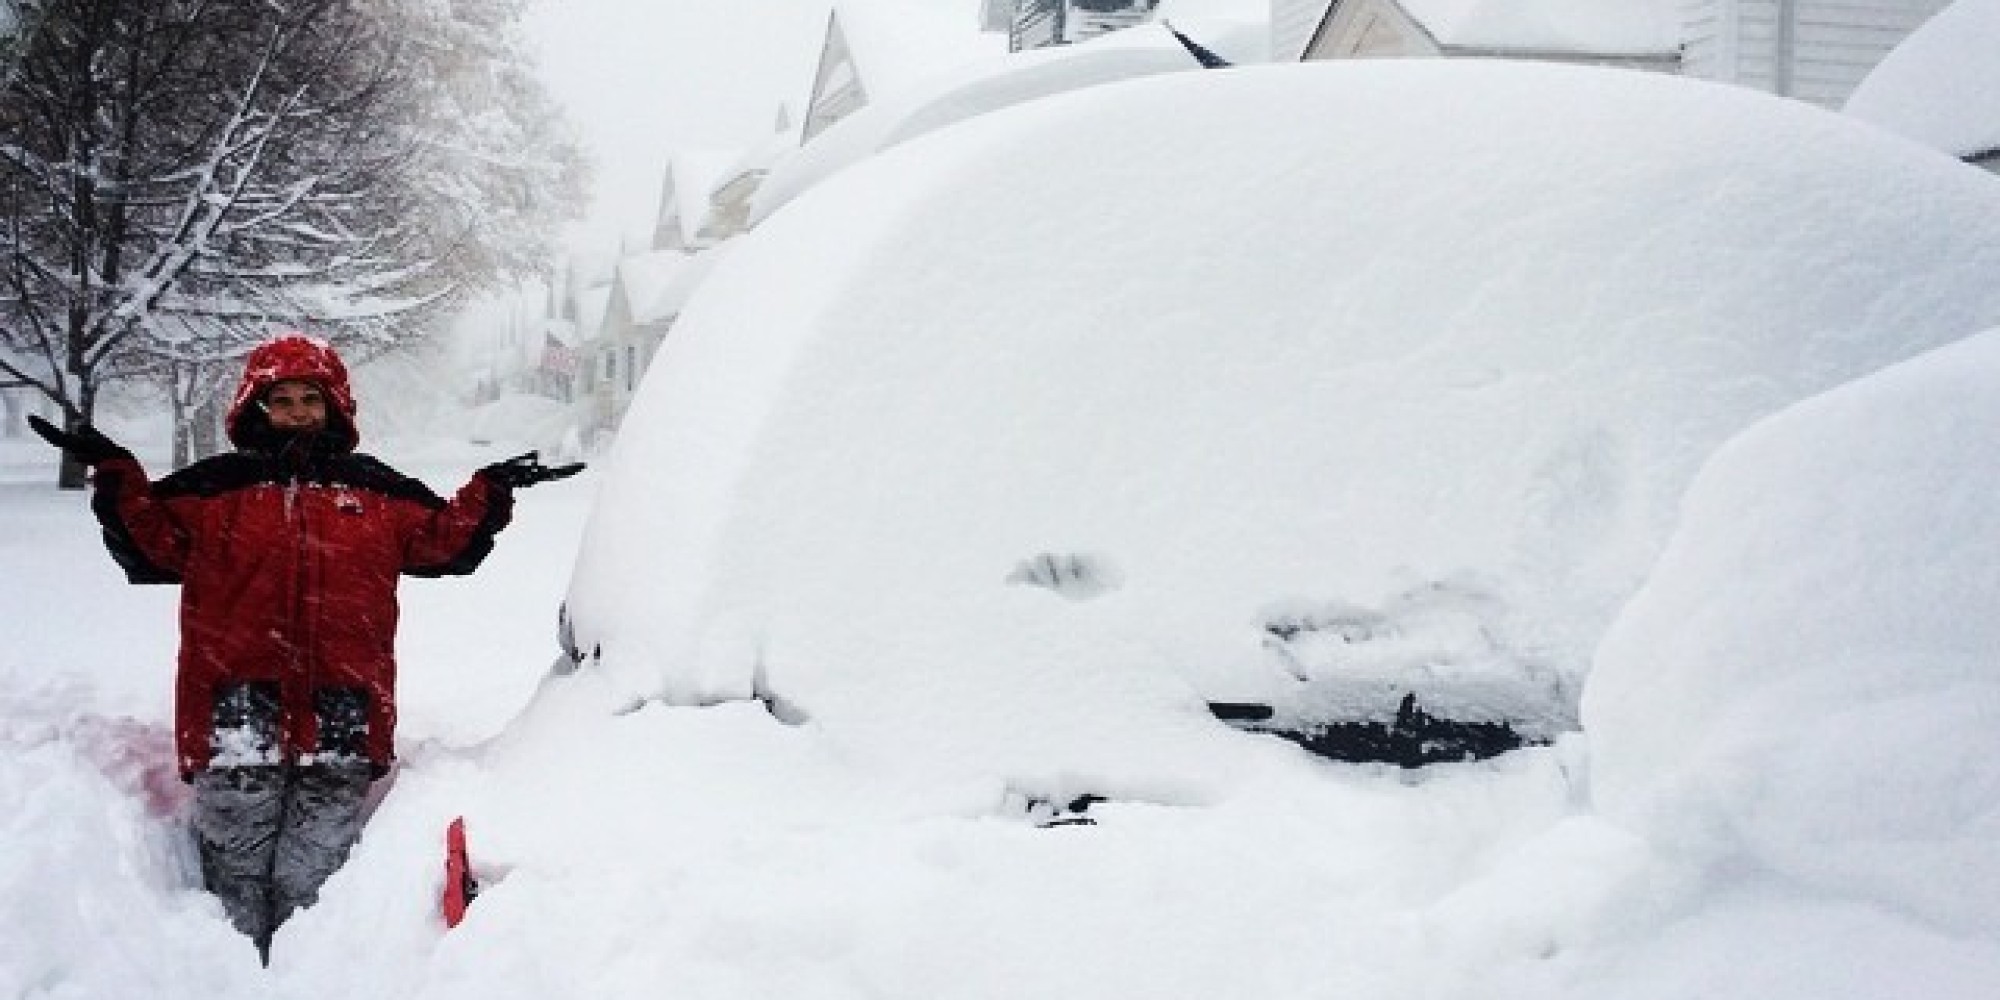 Western New York Snow Storm Could Set Records | HuffPost